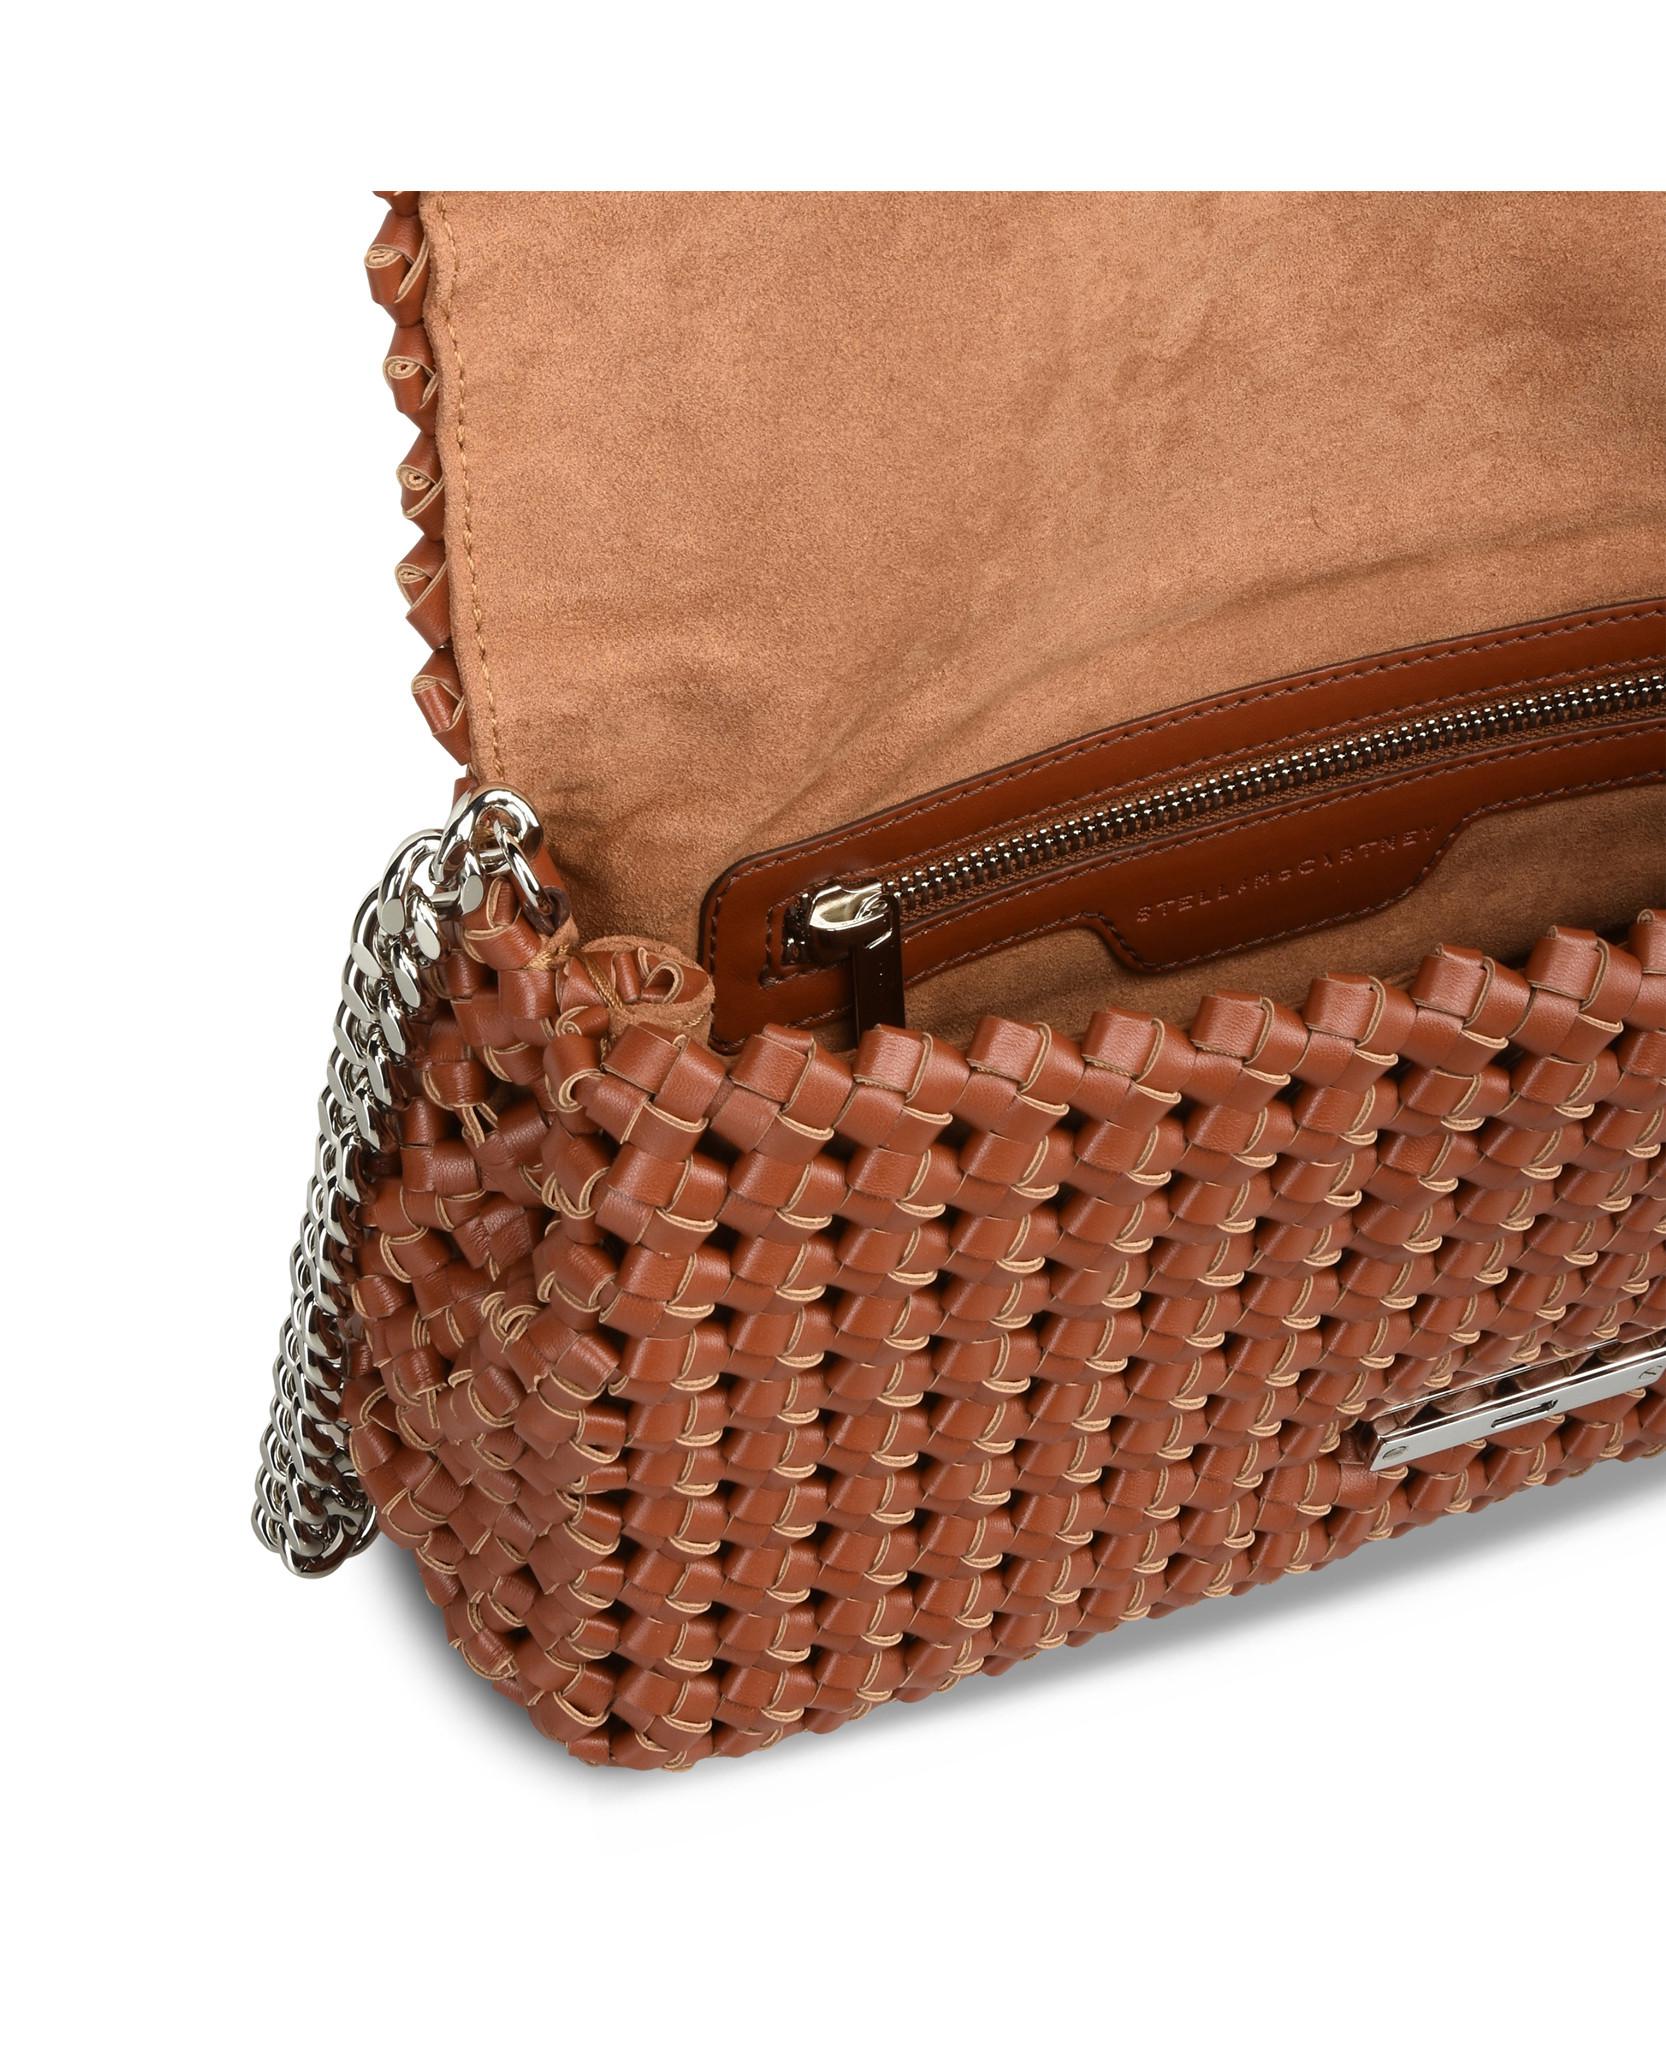 Lyst - Stella McCartney Brandy Becks Small Woven Faux-Leather Shoulder Bag in Brown